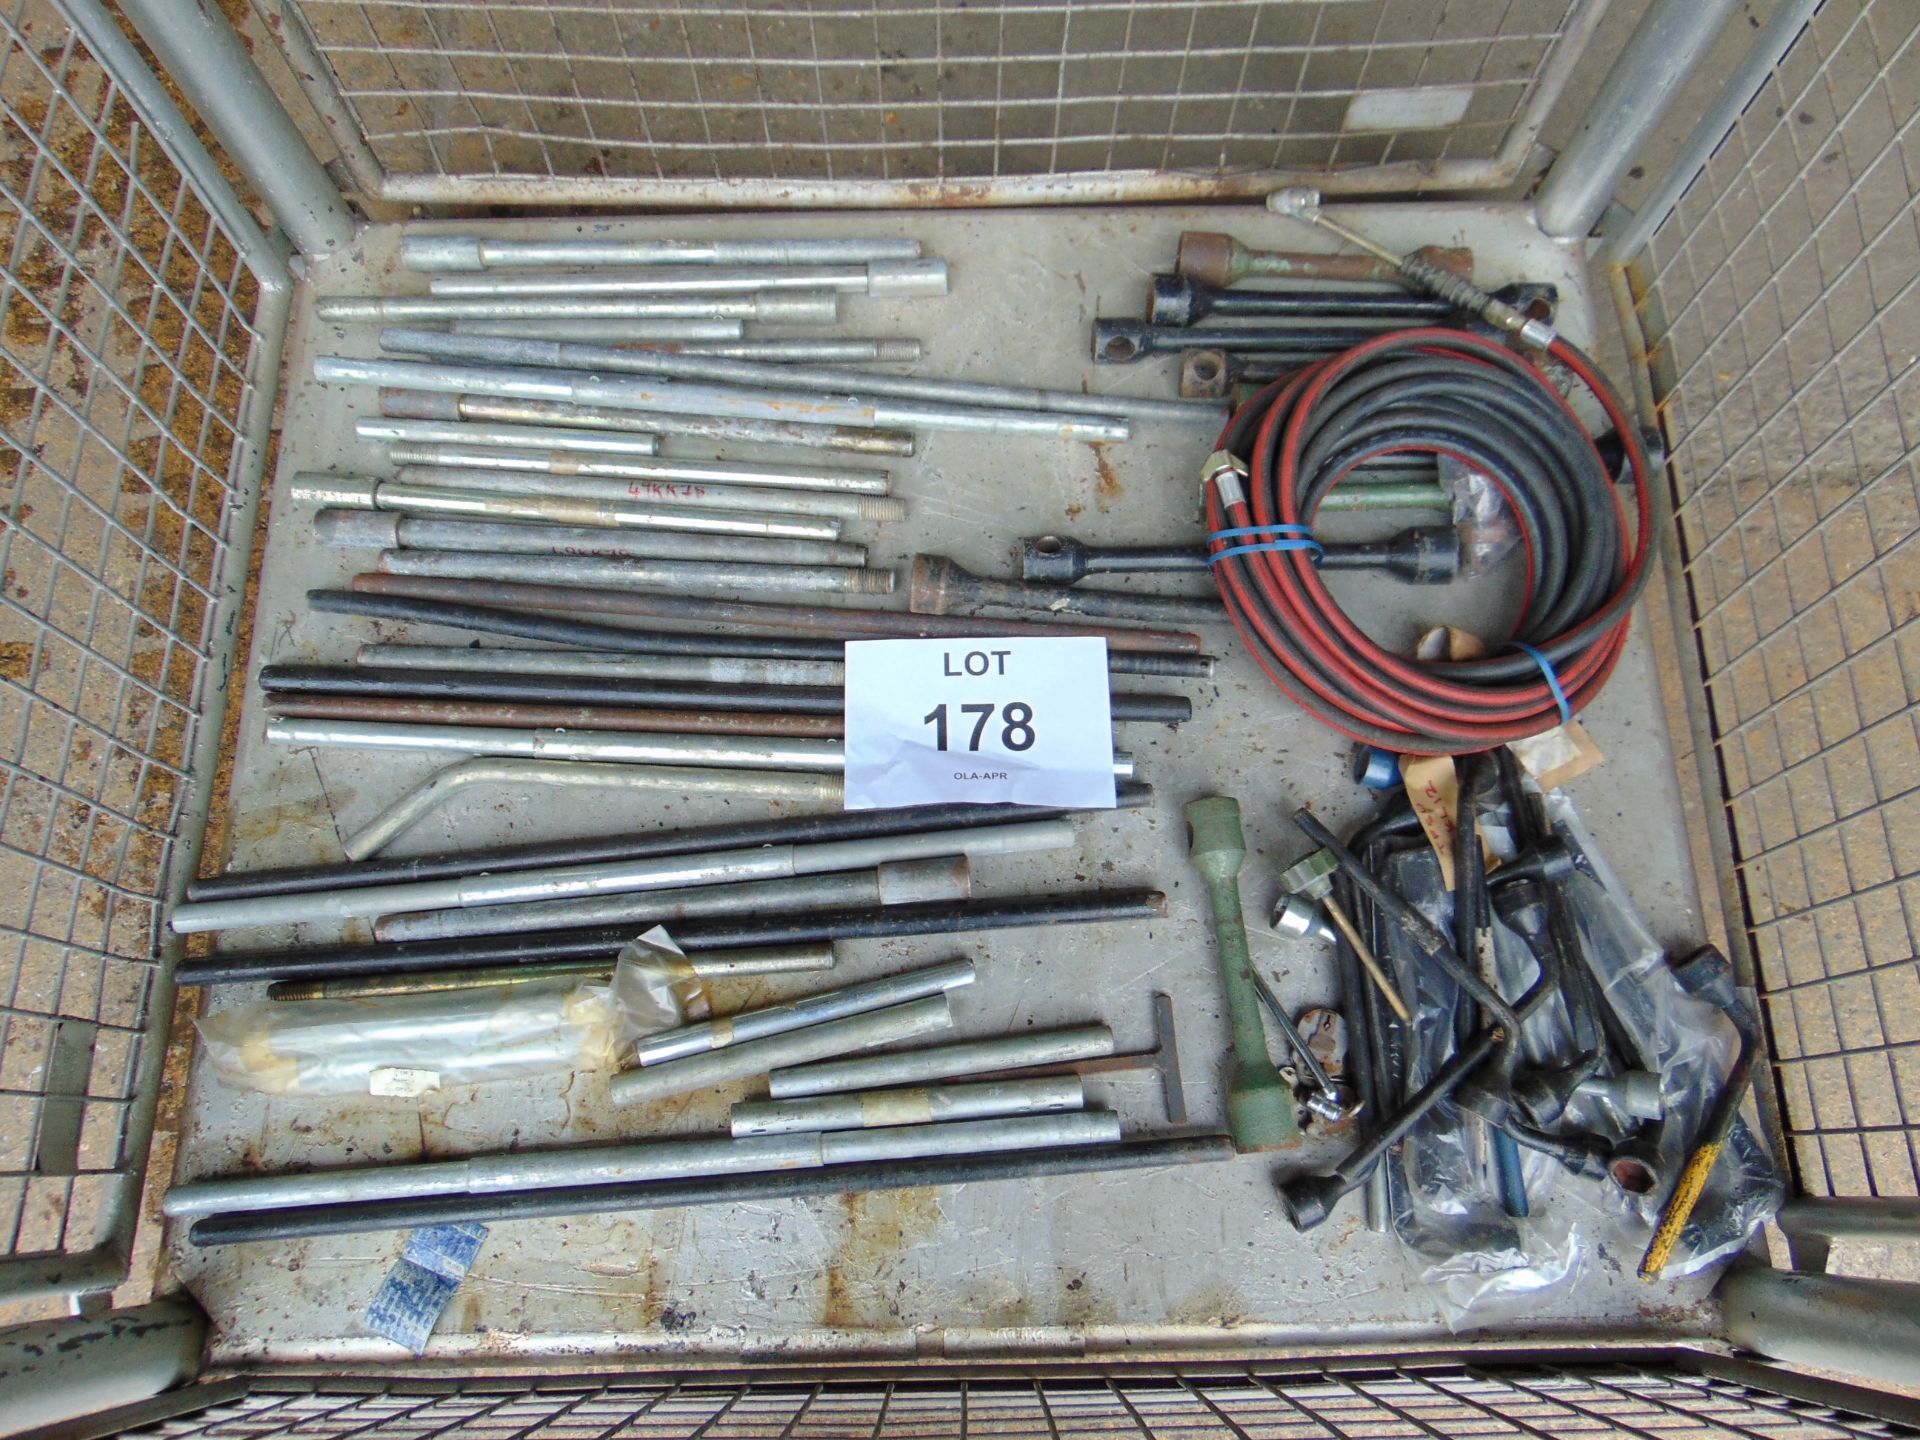 1 x Stillage Assortment of Tools, Wheel Wrenches, Air Line Etc